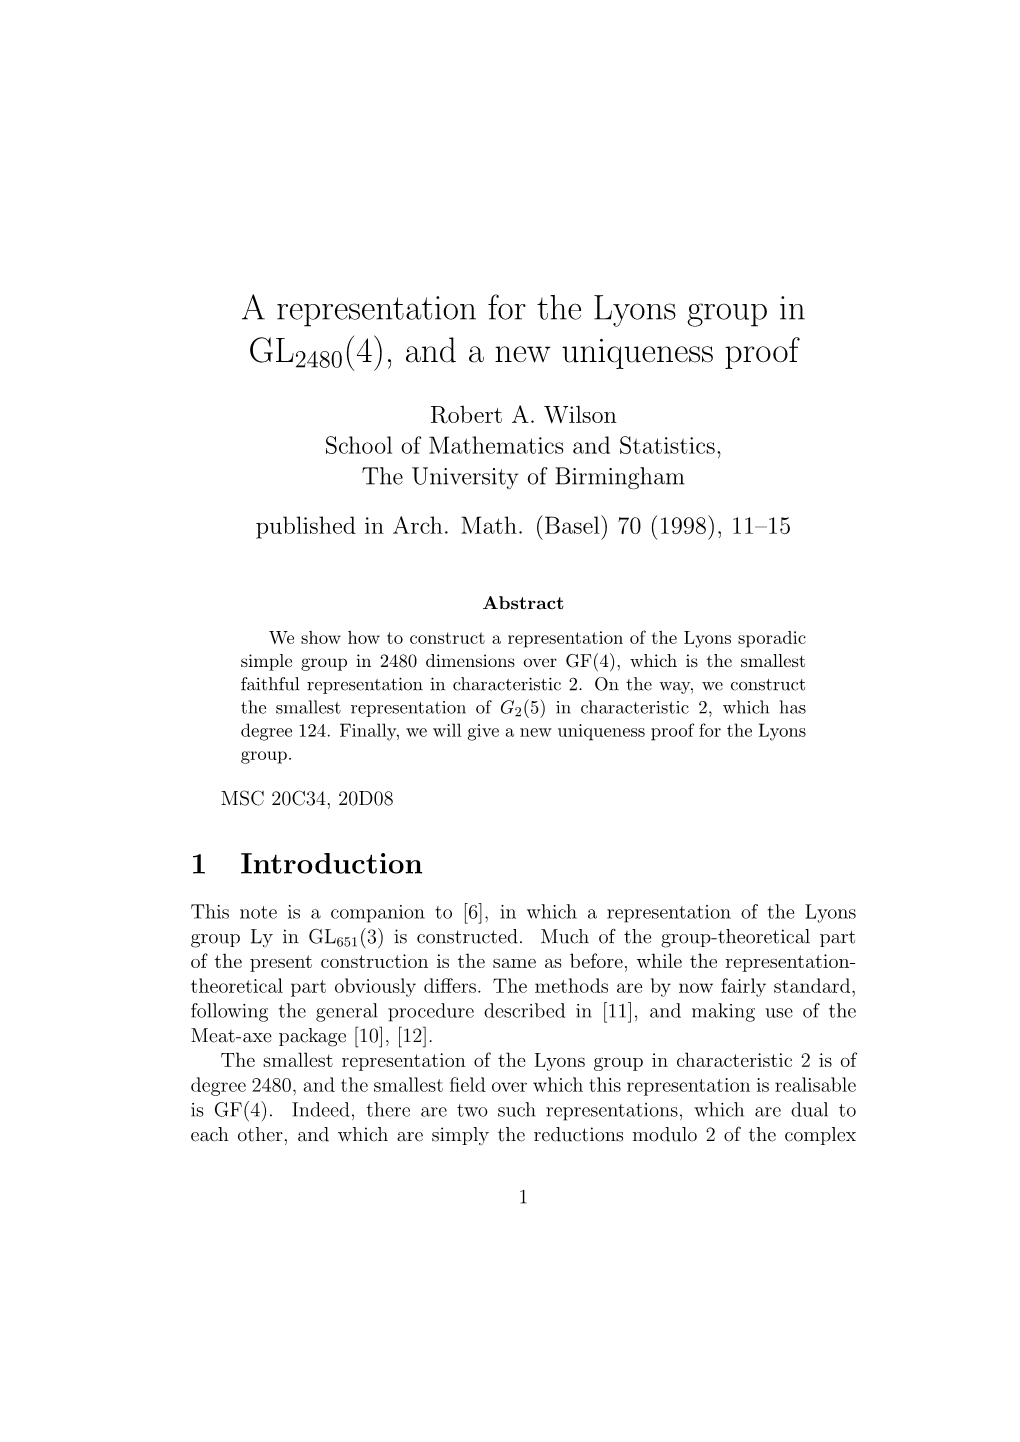 A Representation for the Lyons Group in GL2480(4), and a New Uniqueness Proof